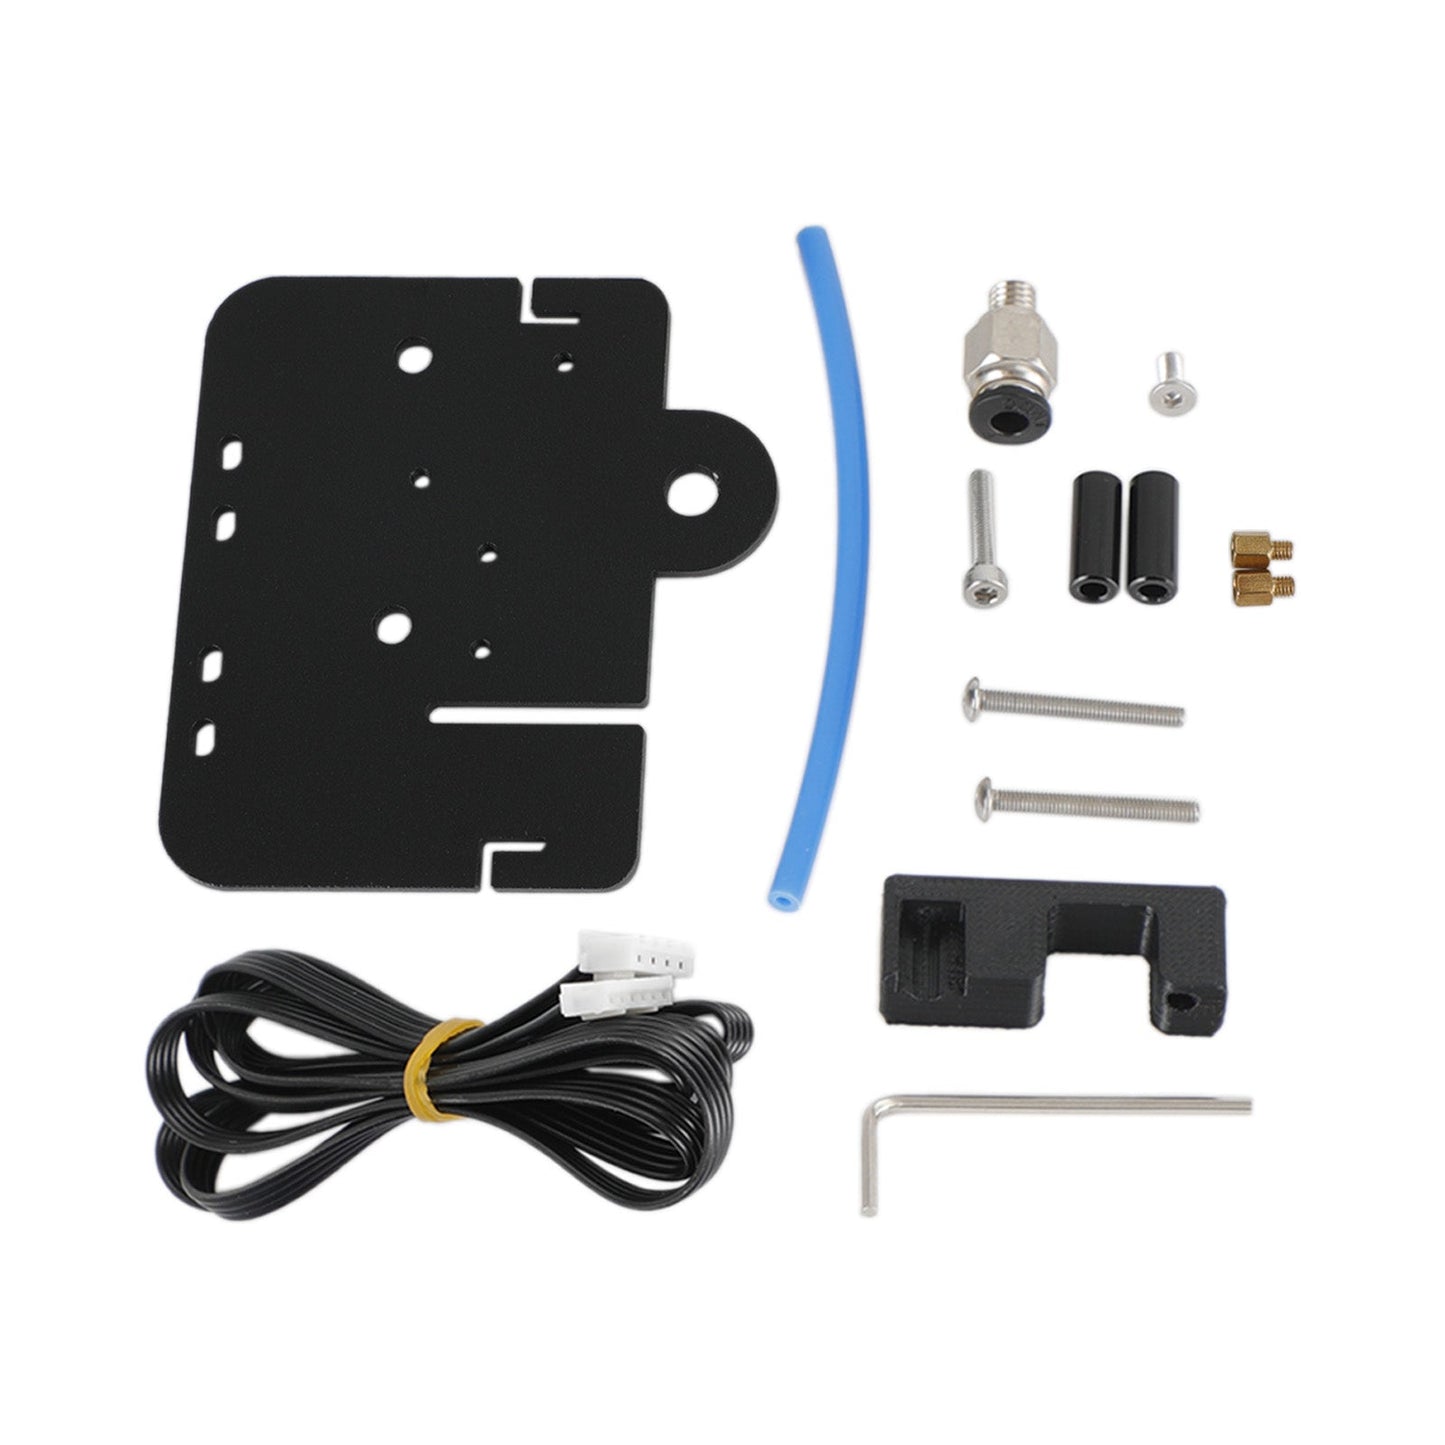 Z-Achse Direct Drive Extruder Direct Drive Plate Kit für Creality Ender-5